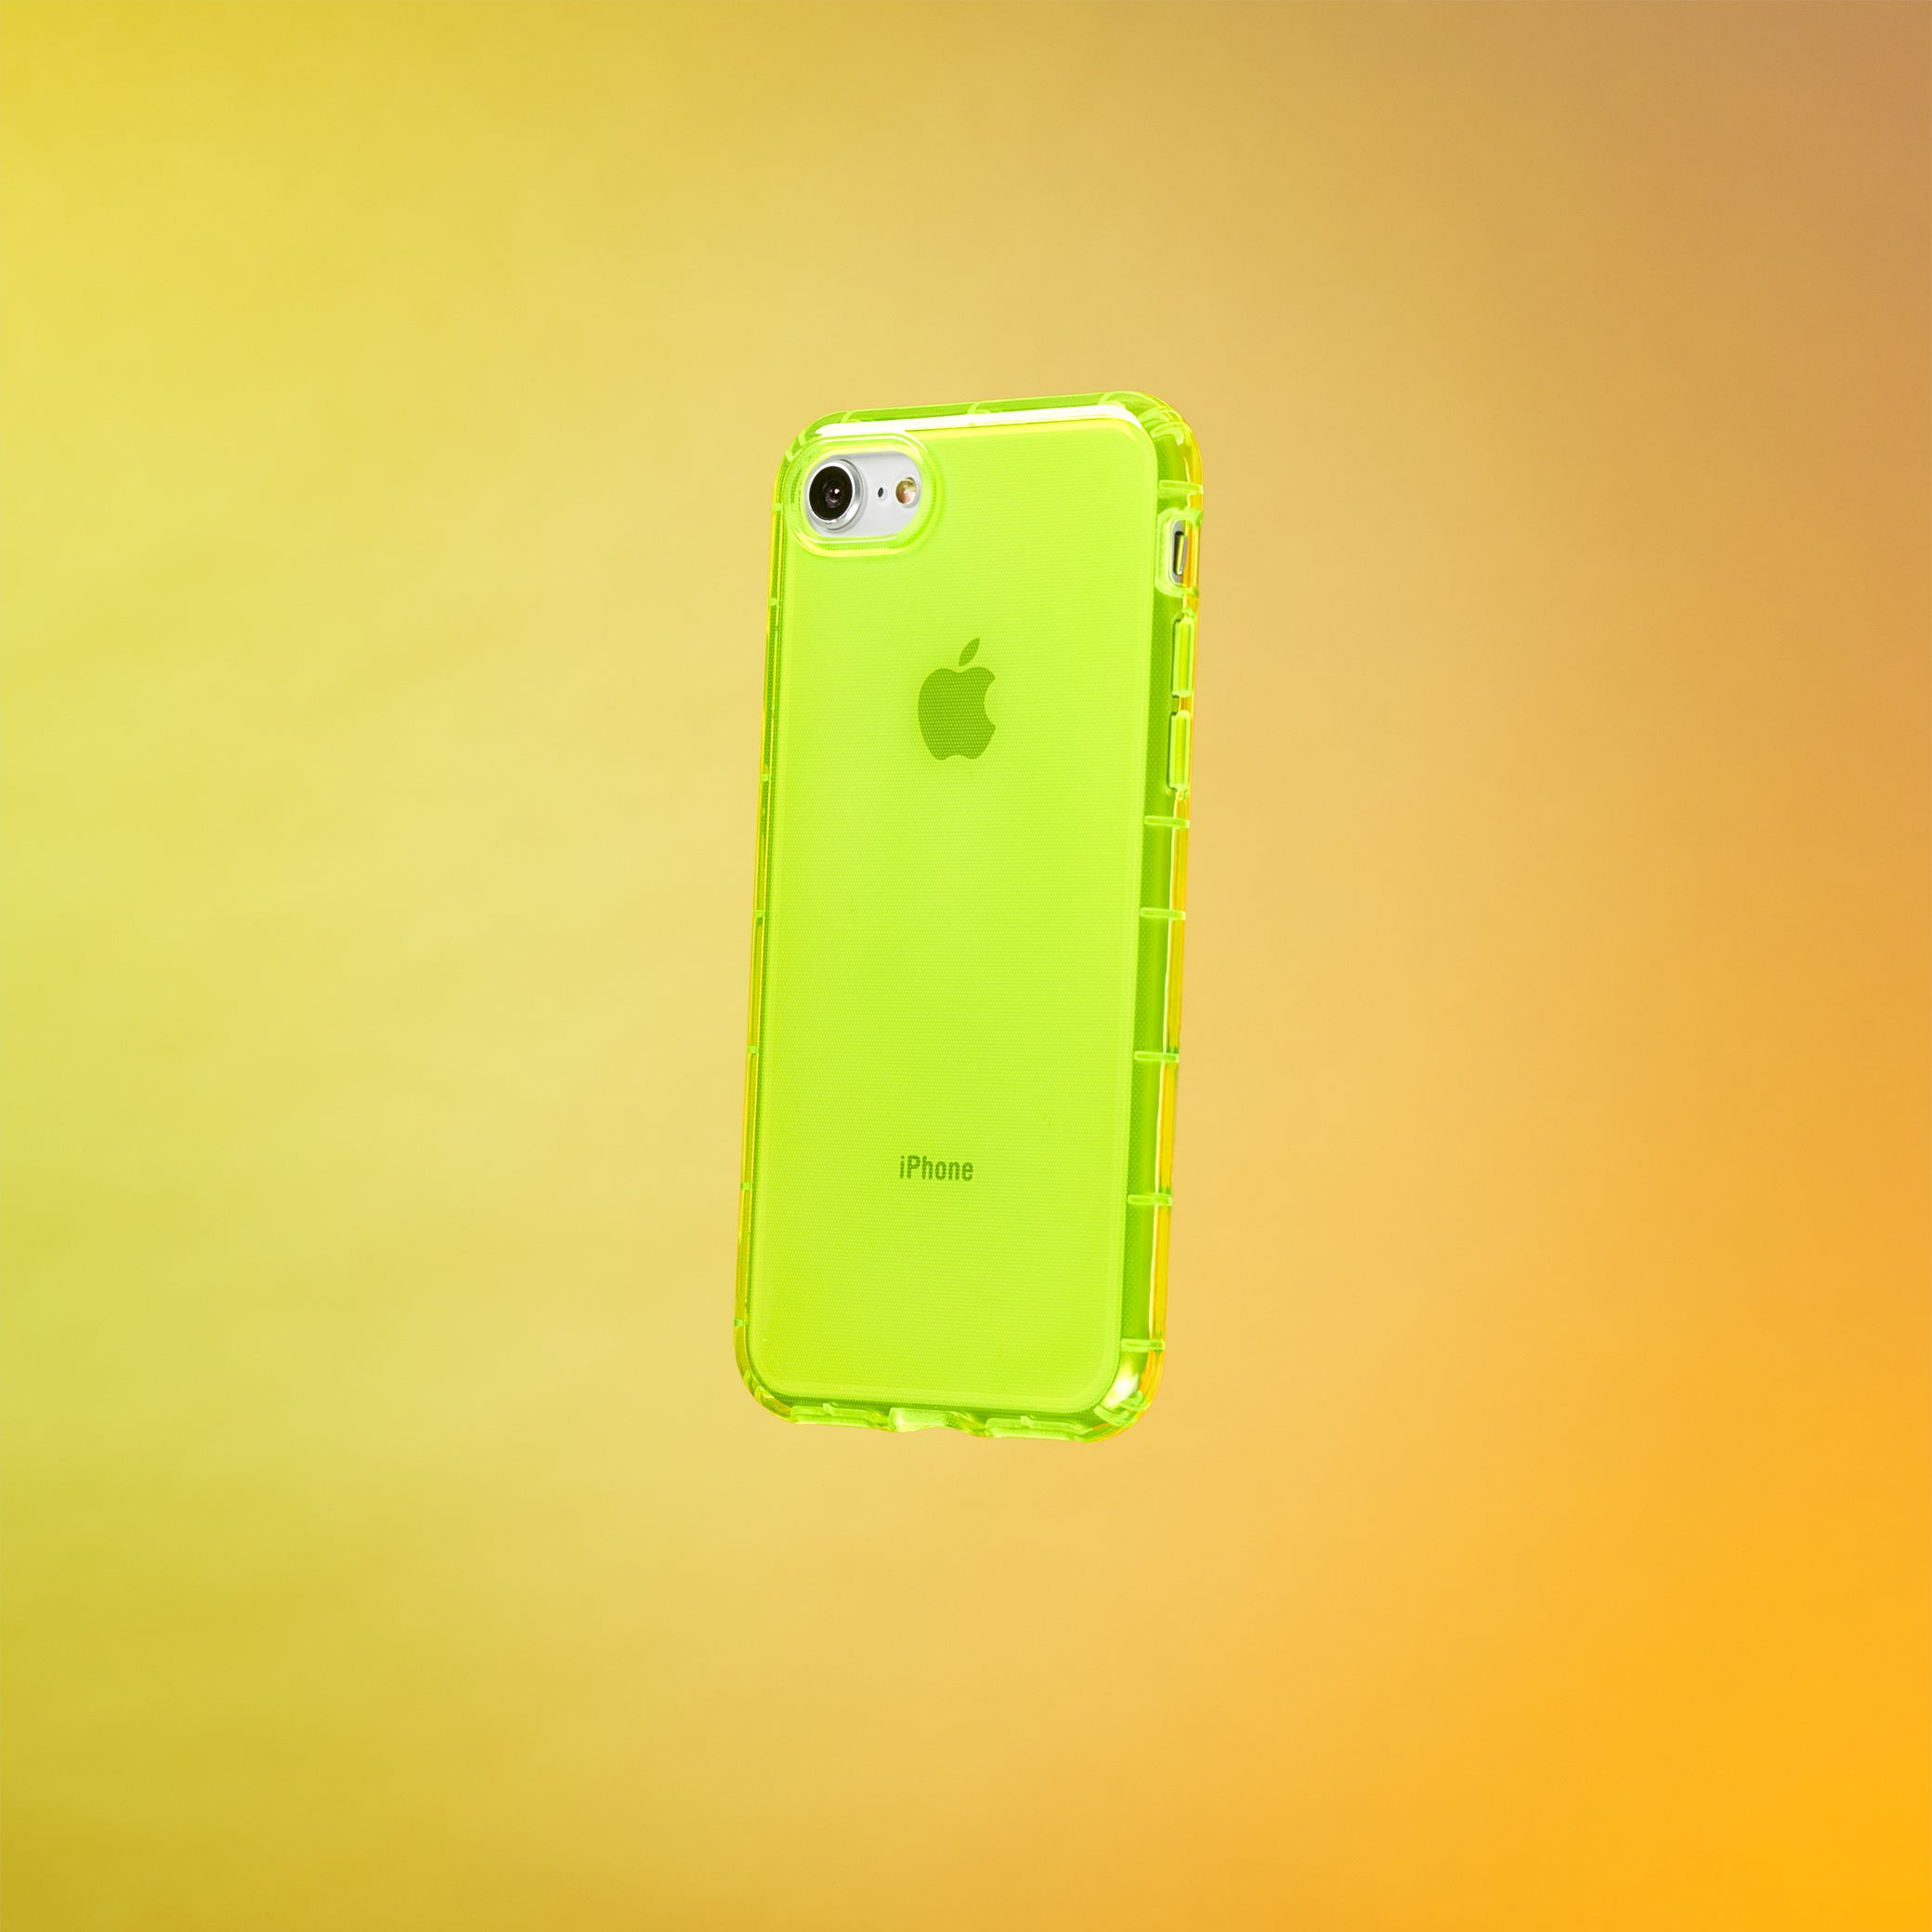 Highlighter Case for iPhone SE, iPhone 8 & iPhone 7 - Conspicuous Neon Yellow